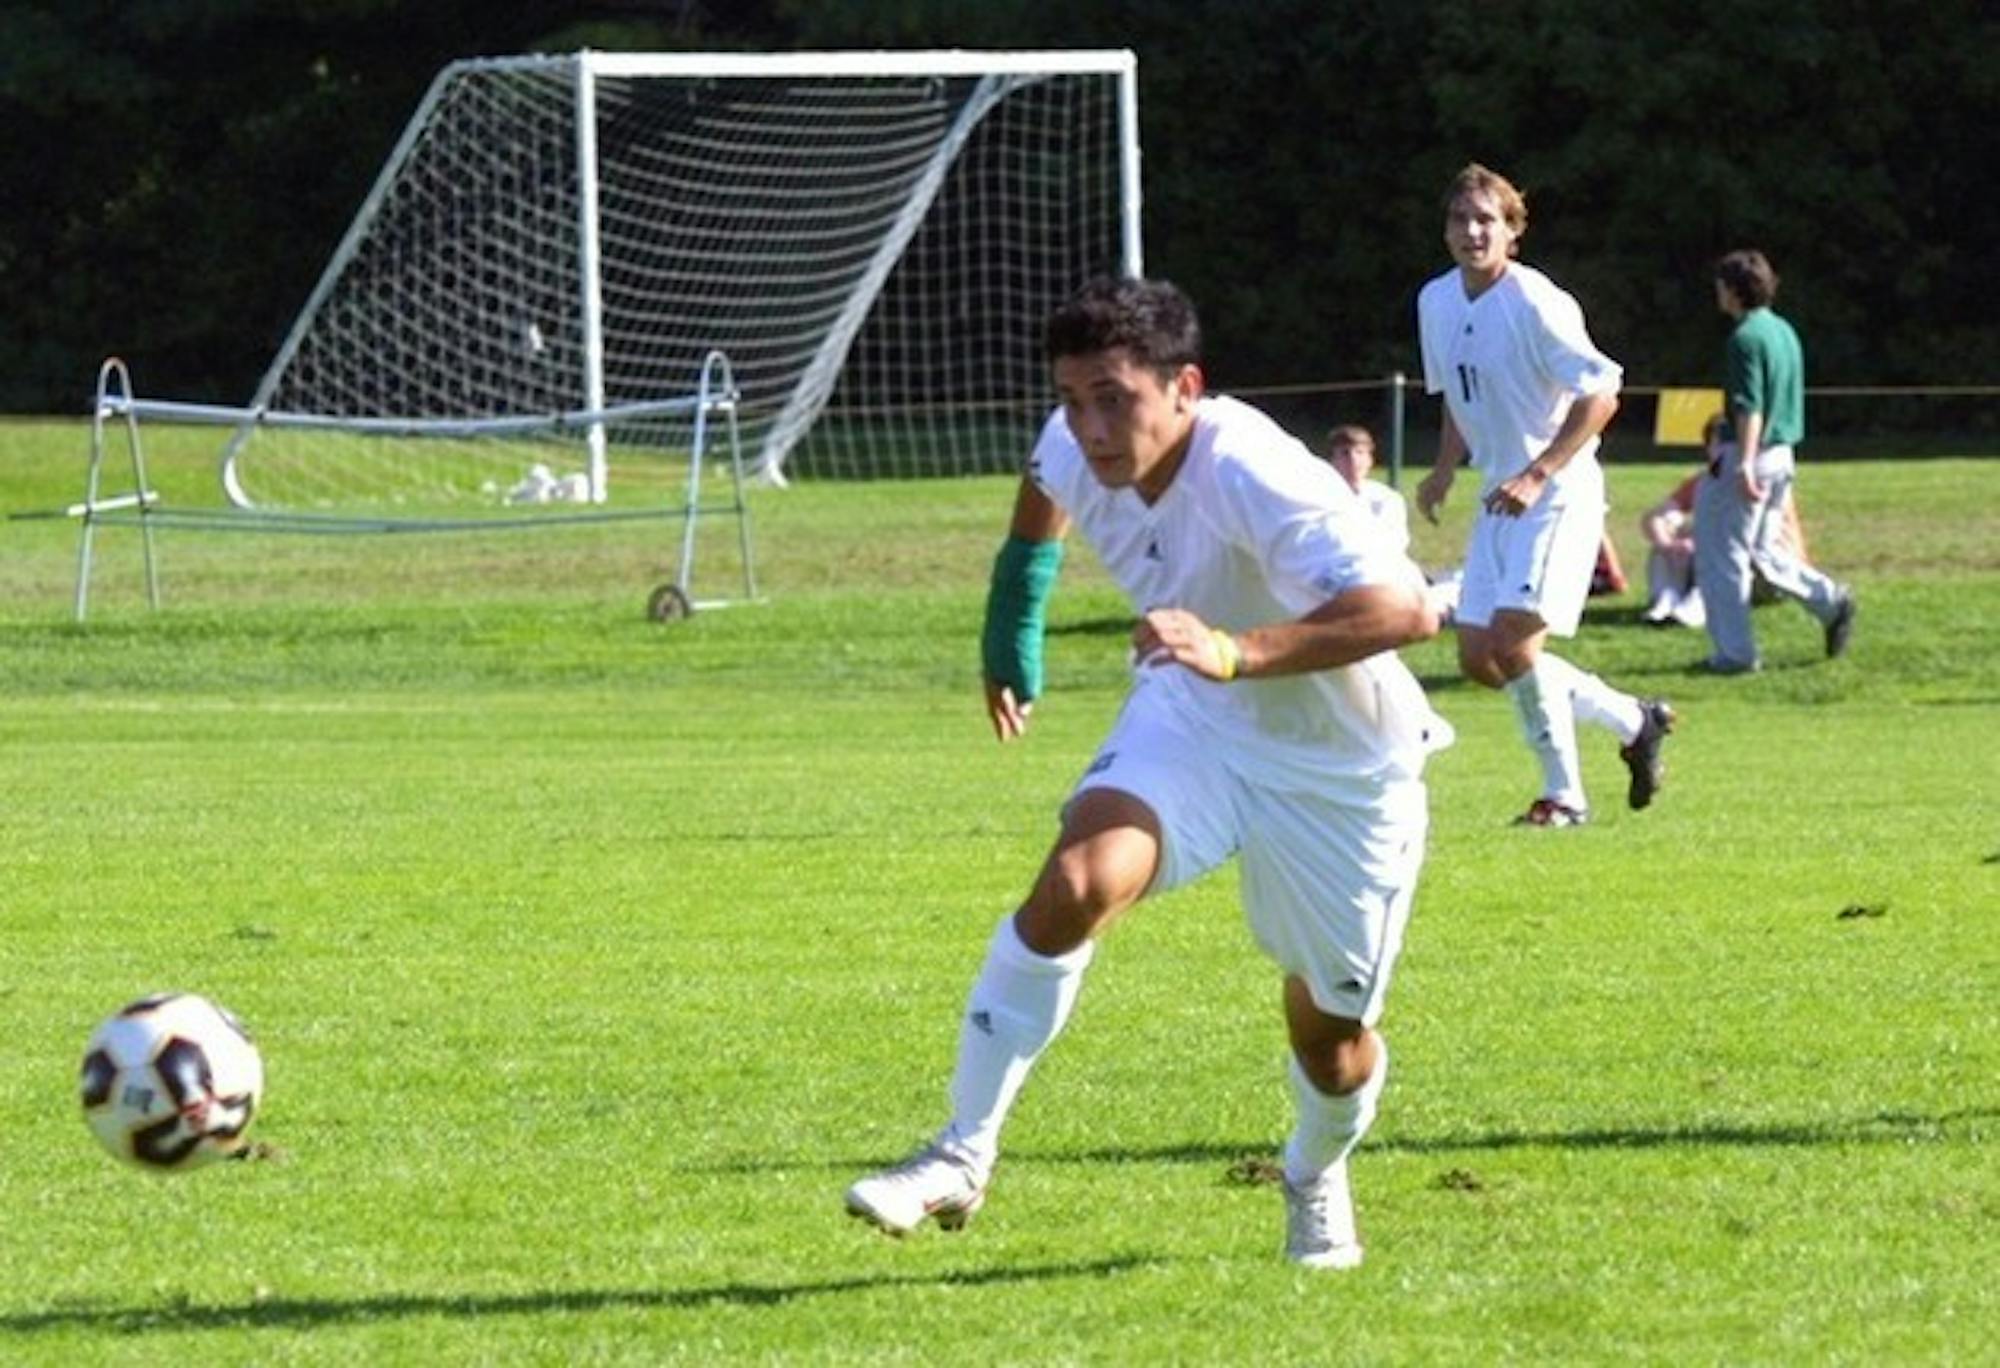 Tom Lobben '08 will attempt to help the men's soccer team score a win over Brown on Saturday.